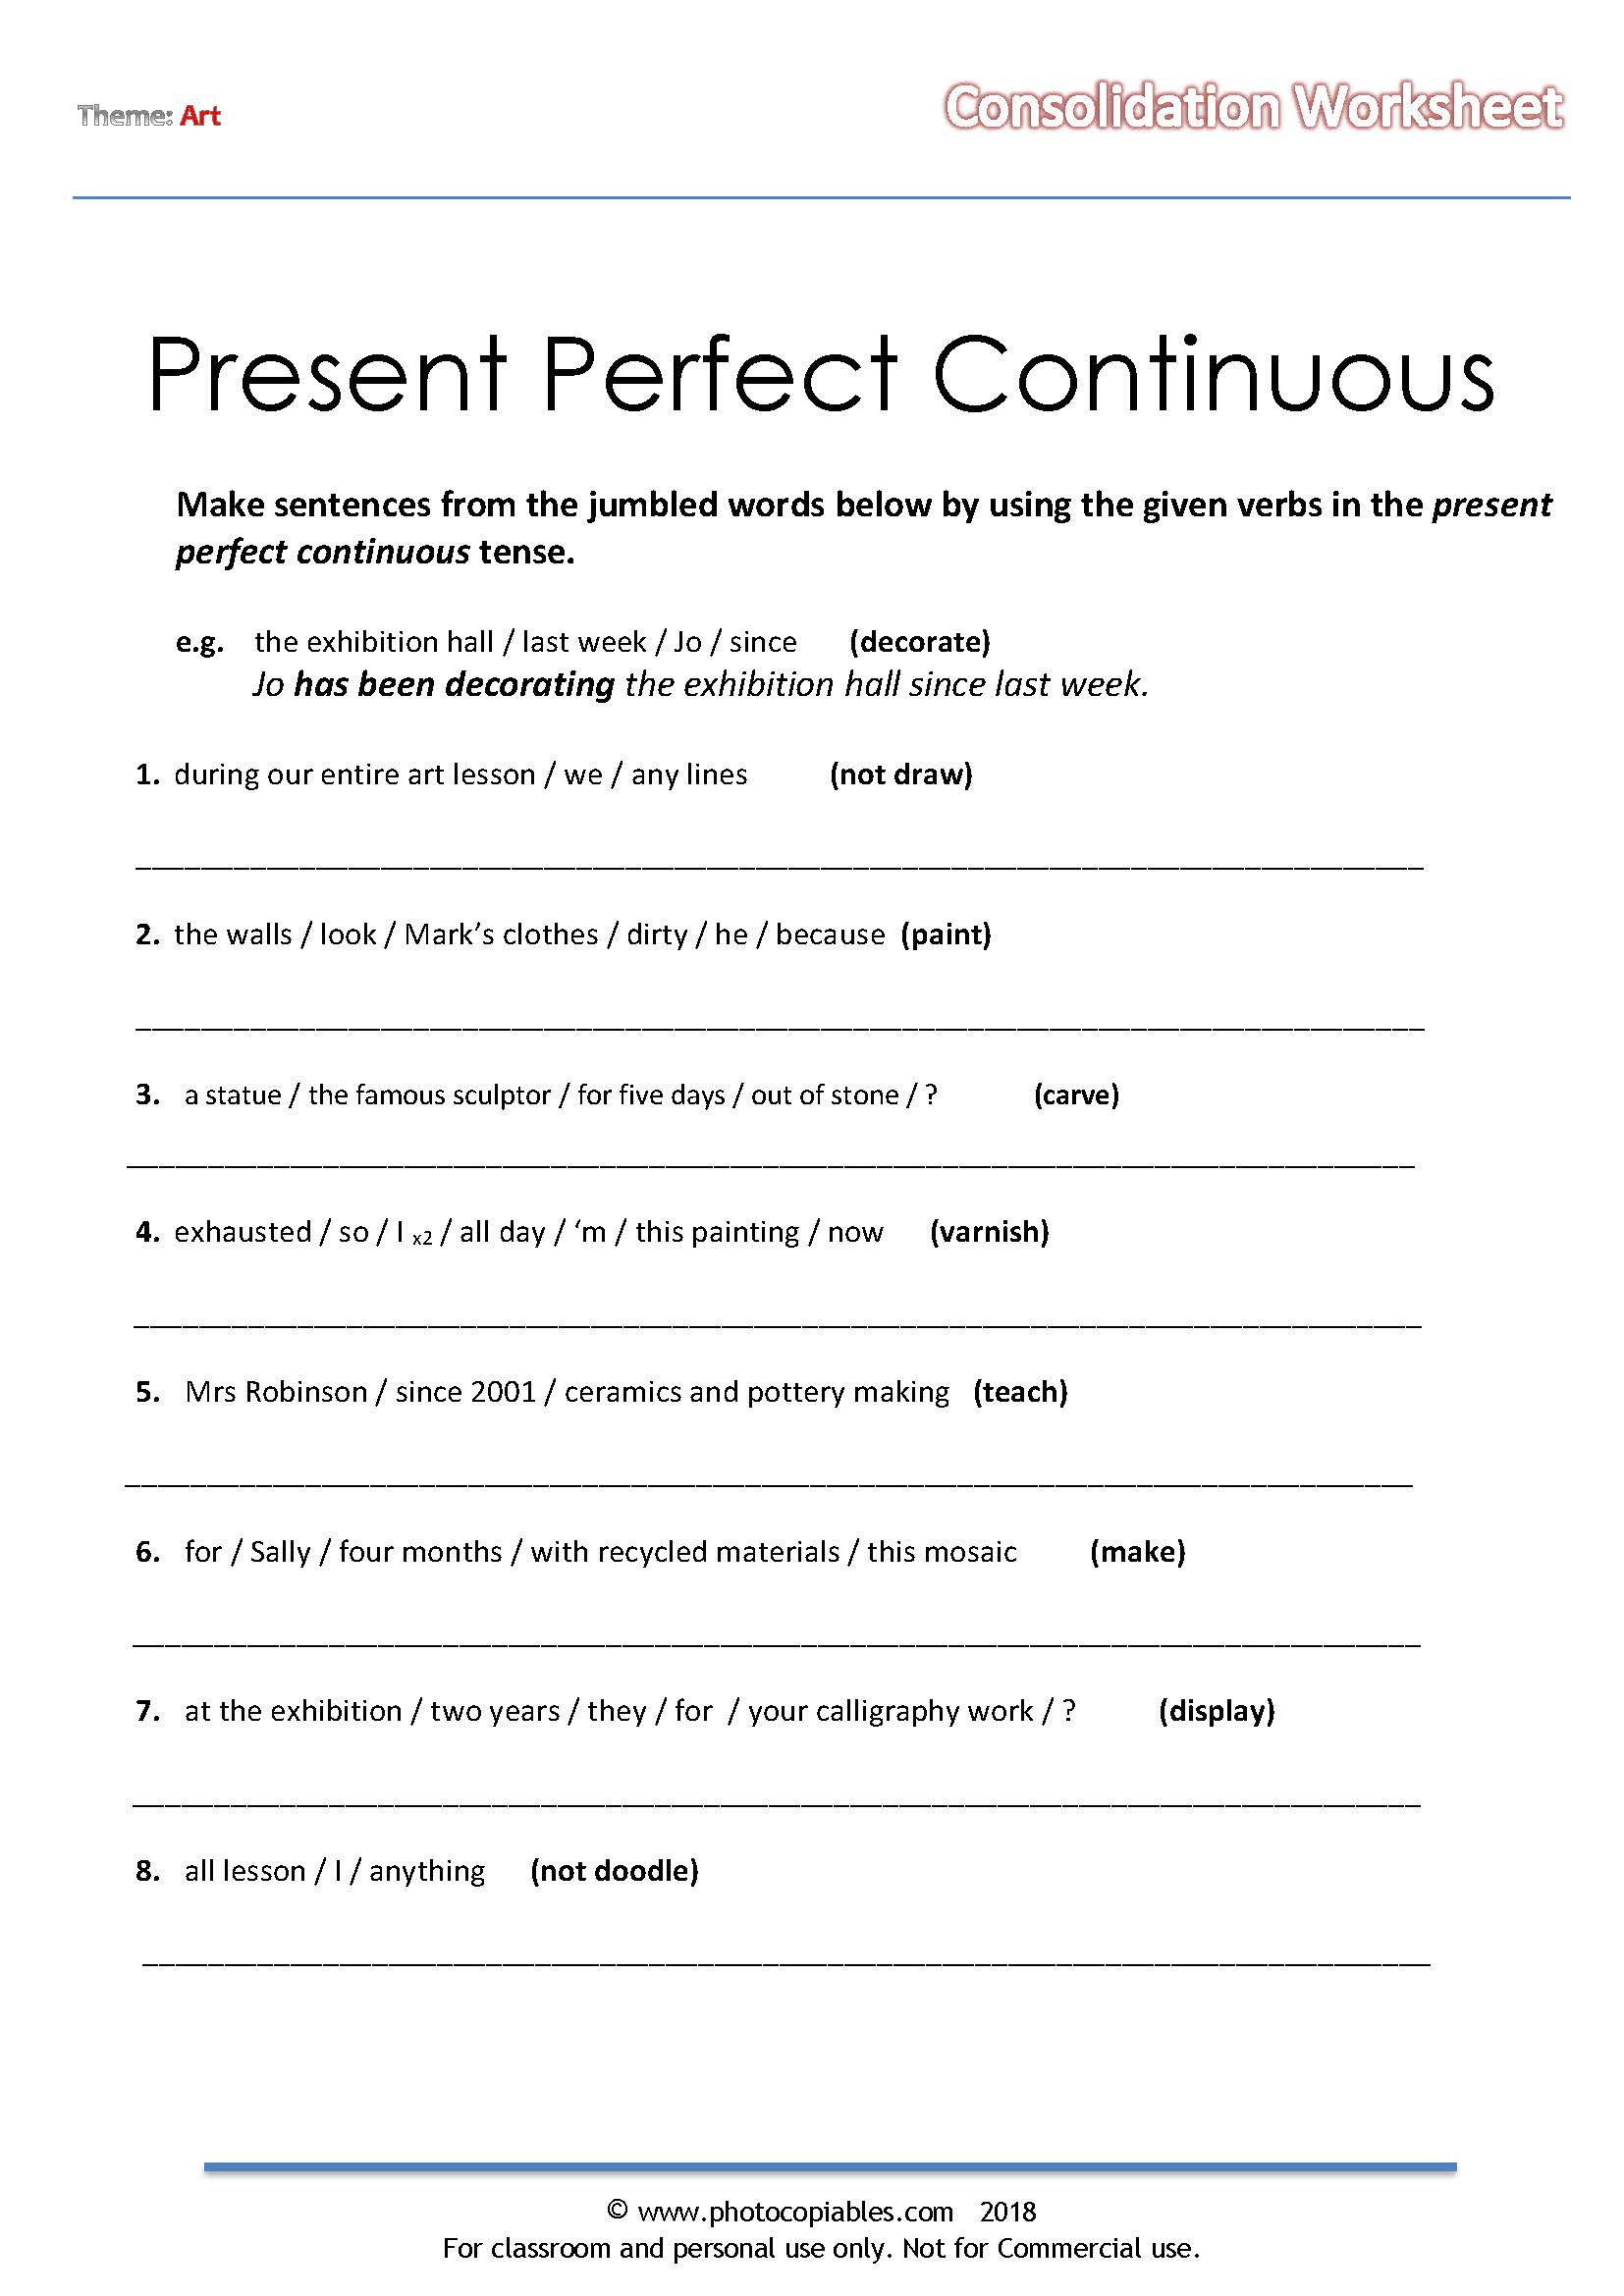 Present Perfect Continuous Worksheet Photocopiables